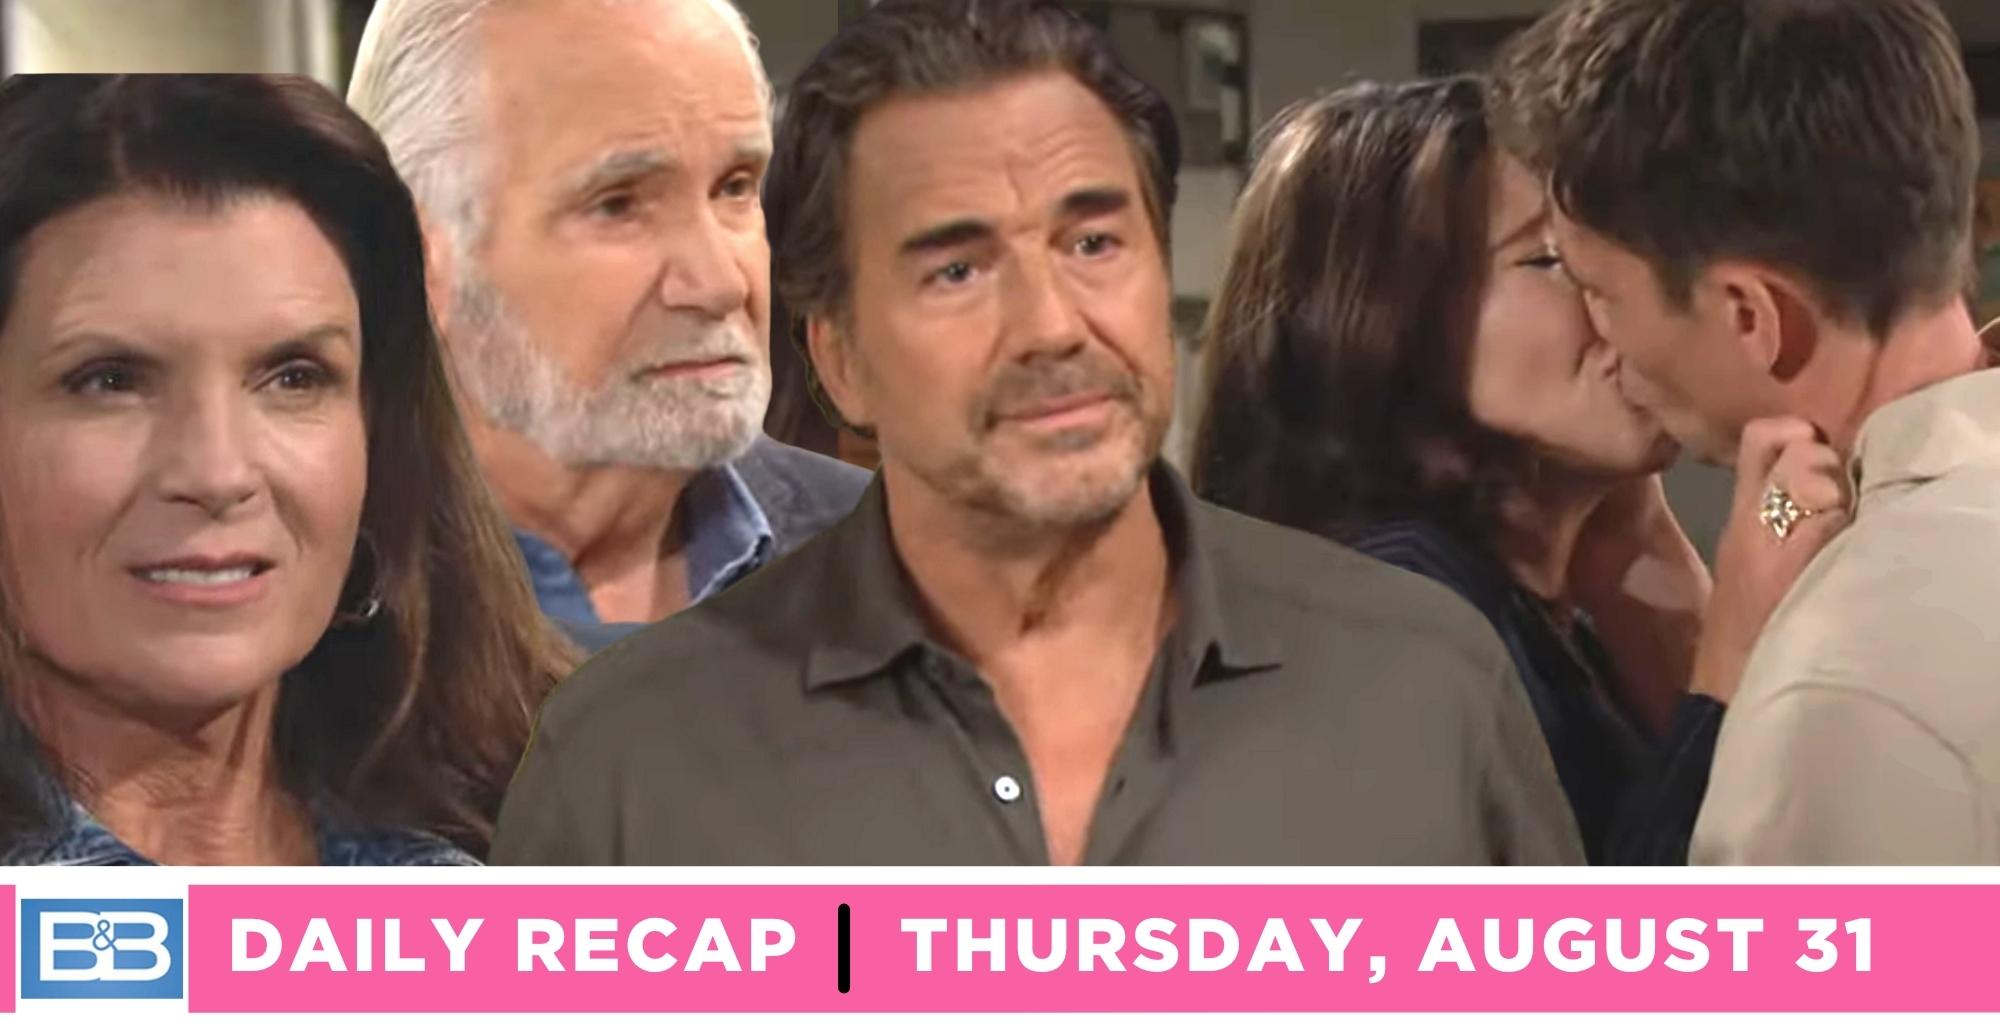 the bold and the beautiful recap for thursday, august 31, 2023, main image steffy and finn kissing, insert shots of sheila, eric, and ridge.